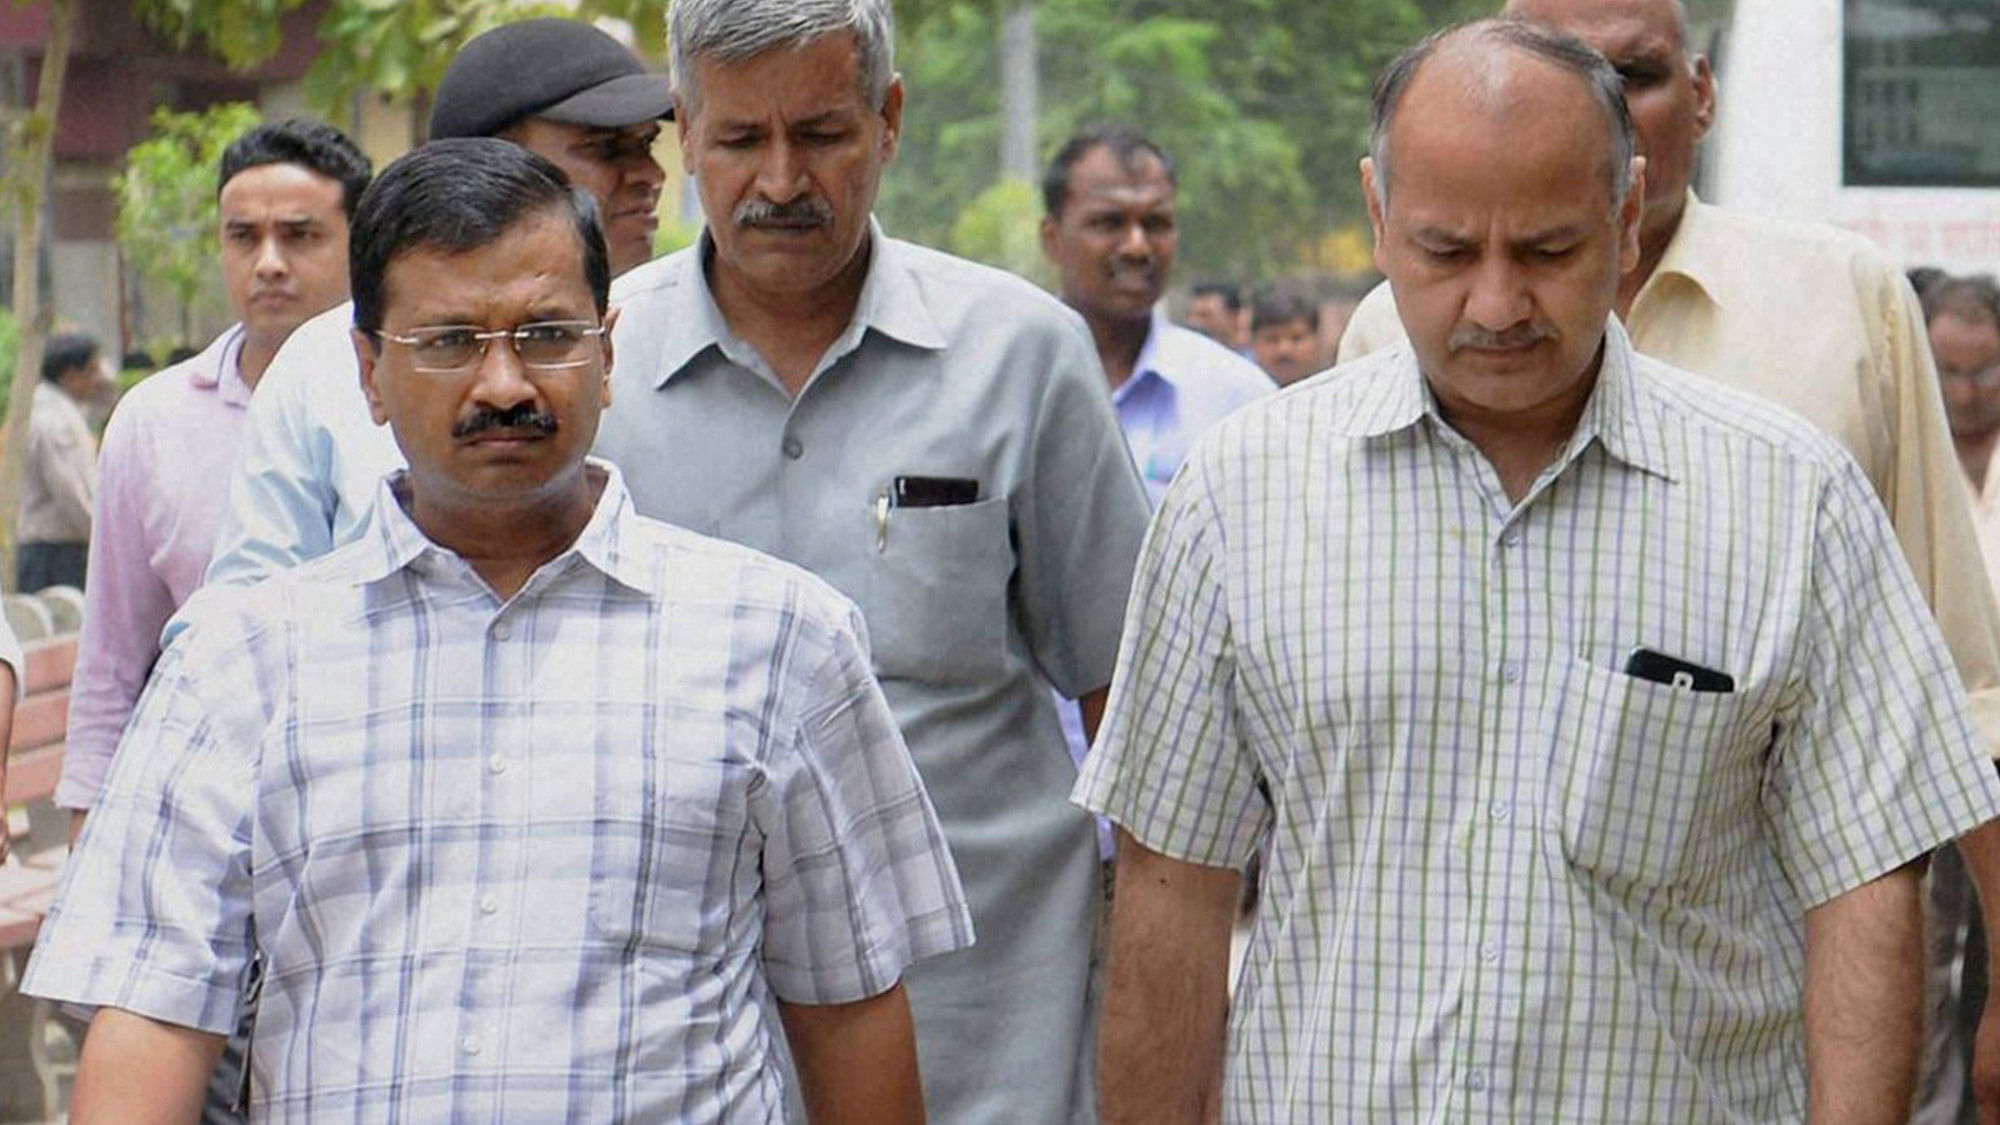 Delhi Chief Minister Arvind Kejriwal (left) and Deputy Chief Minister Manish Sisodia (right). The AAP government tabled the Jan Lokpal Bill in the Delhi Vidhan Sabha on Monday. (Photo: PTI)